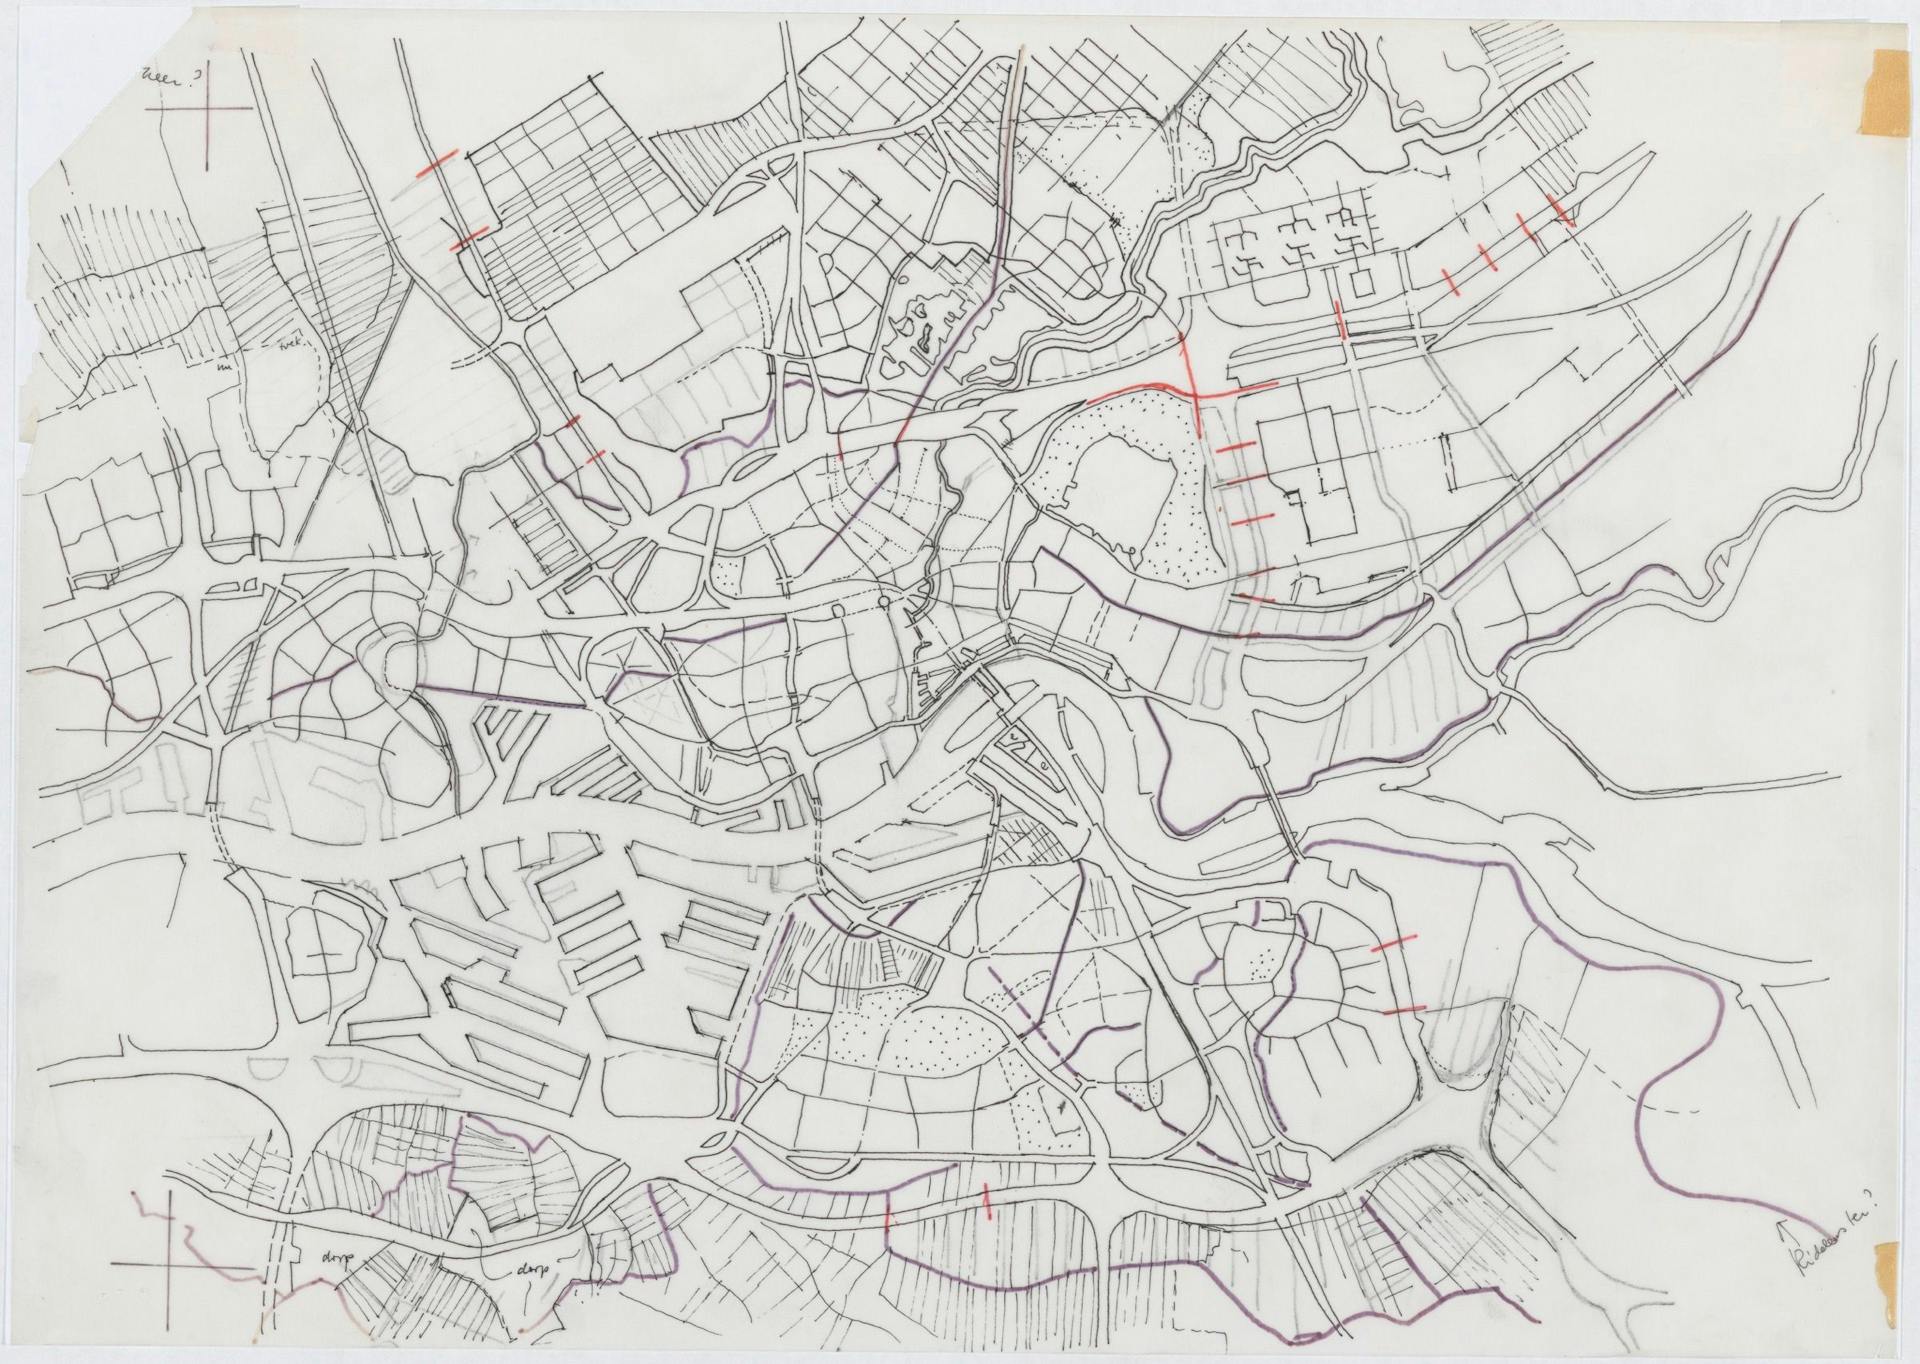 Frits Palmboom. Rotterdam, urbanised landscape, 1985. Loan from Frits Palmboom.